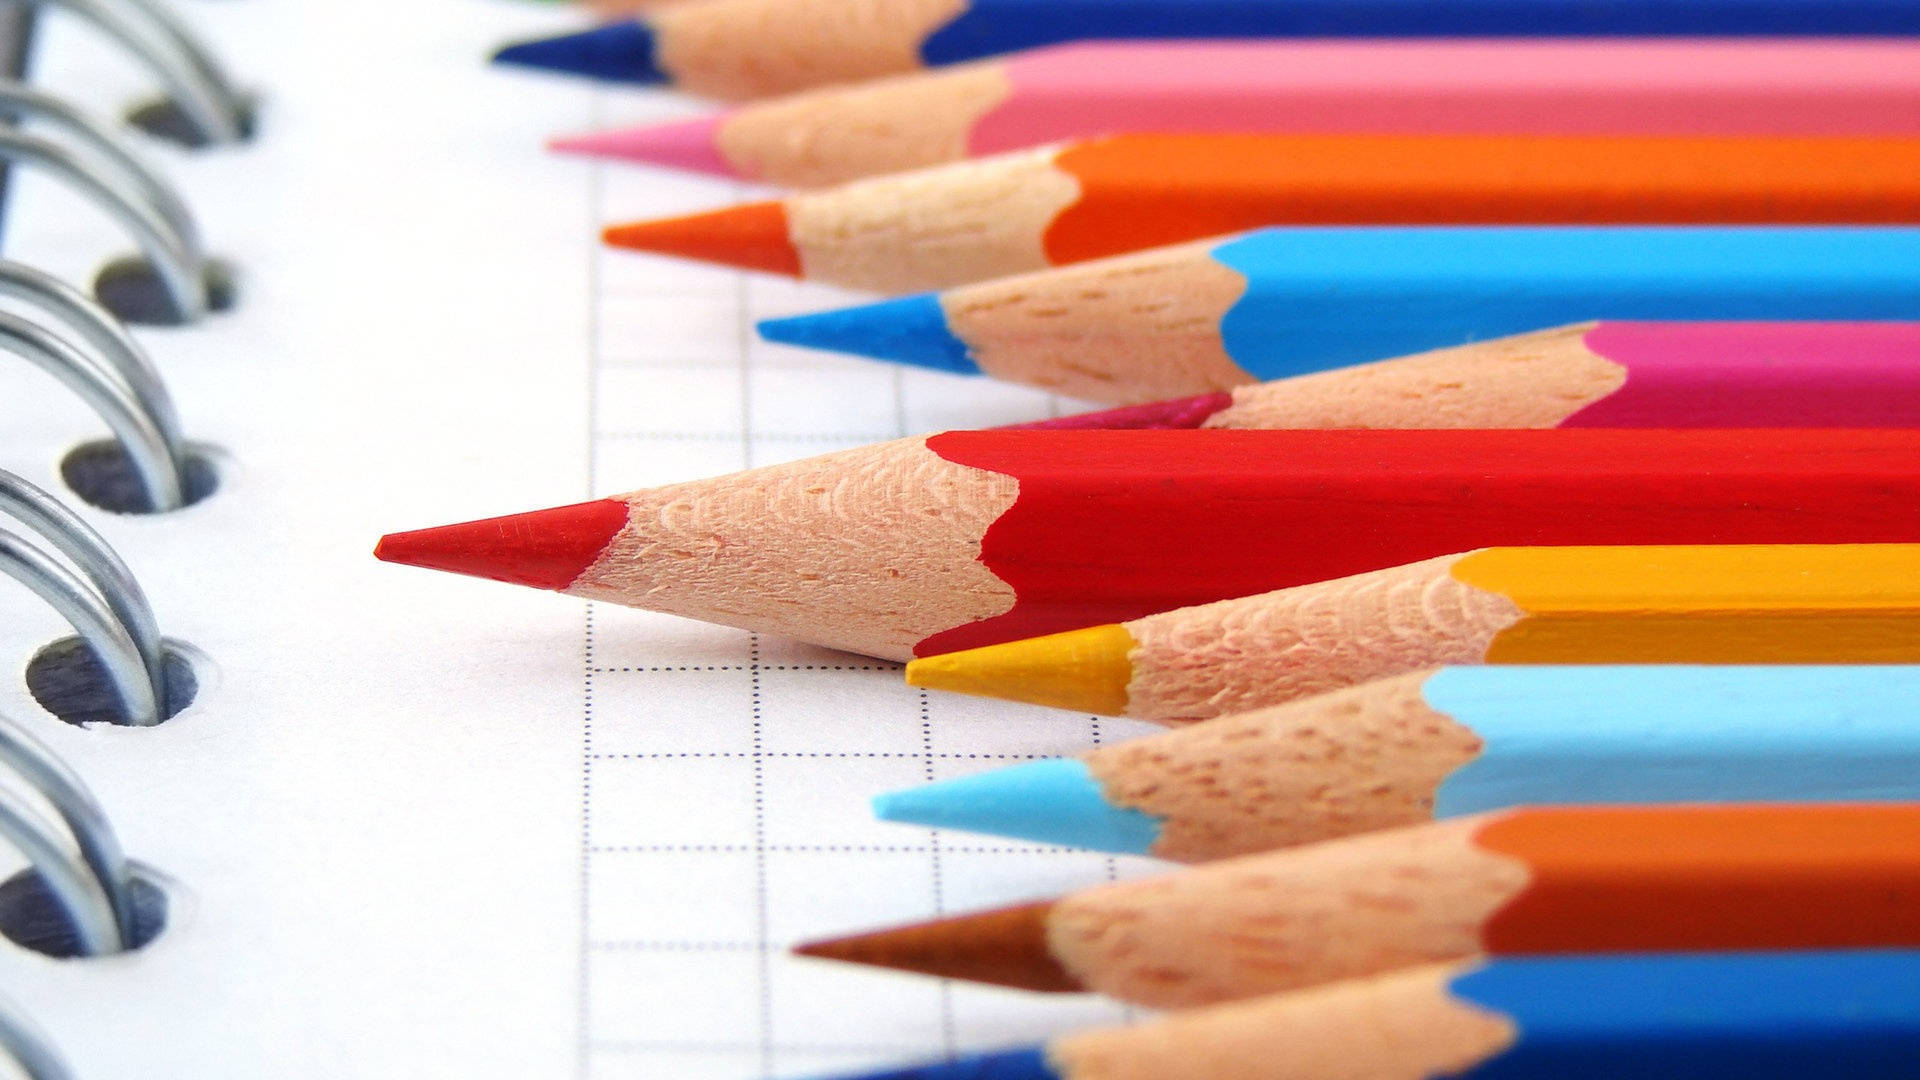 Educational Colored Pencils Background